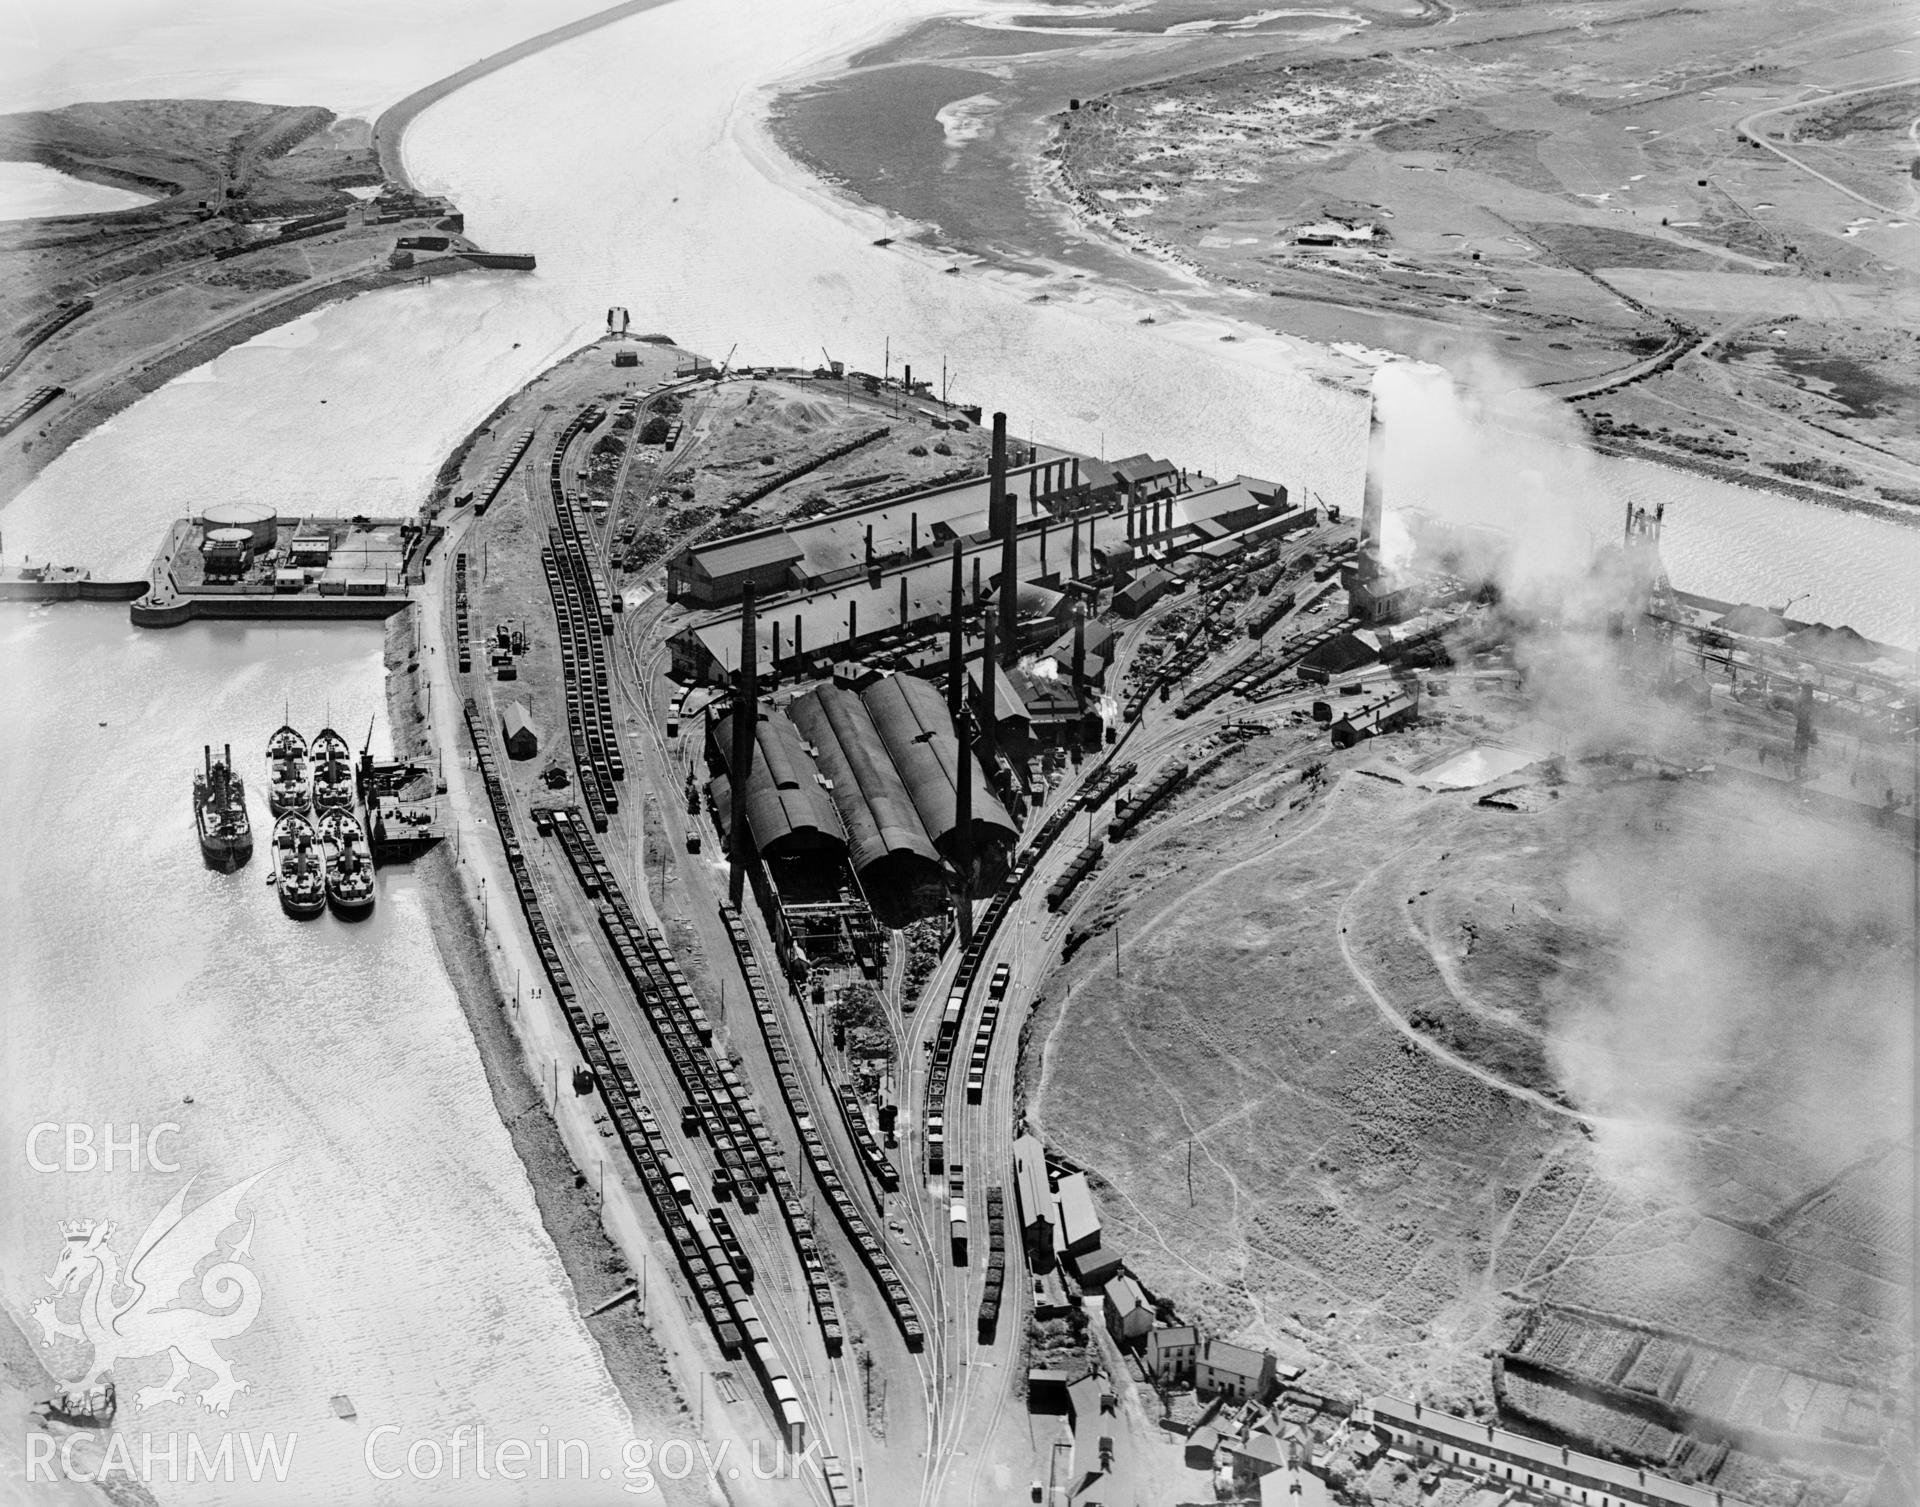 View of Neath River Navigation at Briton Ferry showing Briton Ferry dock, Cambria Cokeworks, Gwalia and Victoria tinplate works and Britain Ferry steelworks, oblique aerial view. 5?x4? black and white glass plate negative.